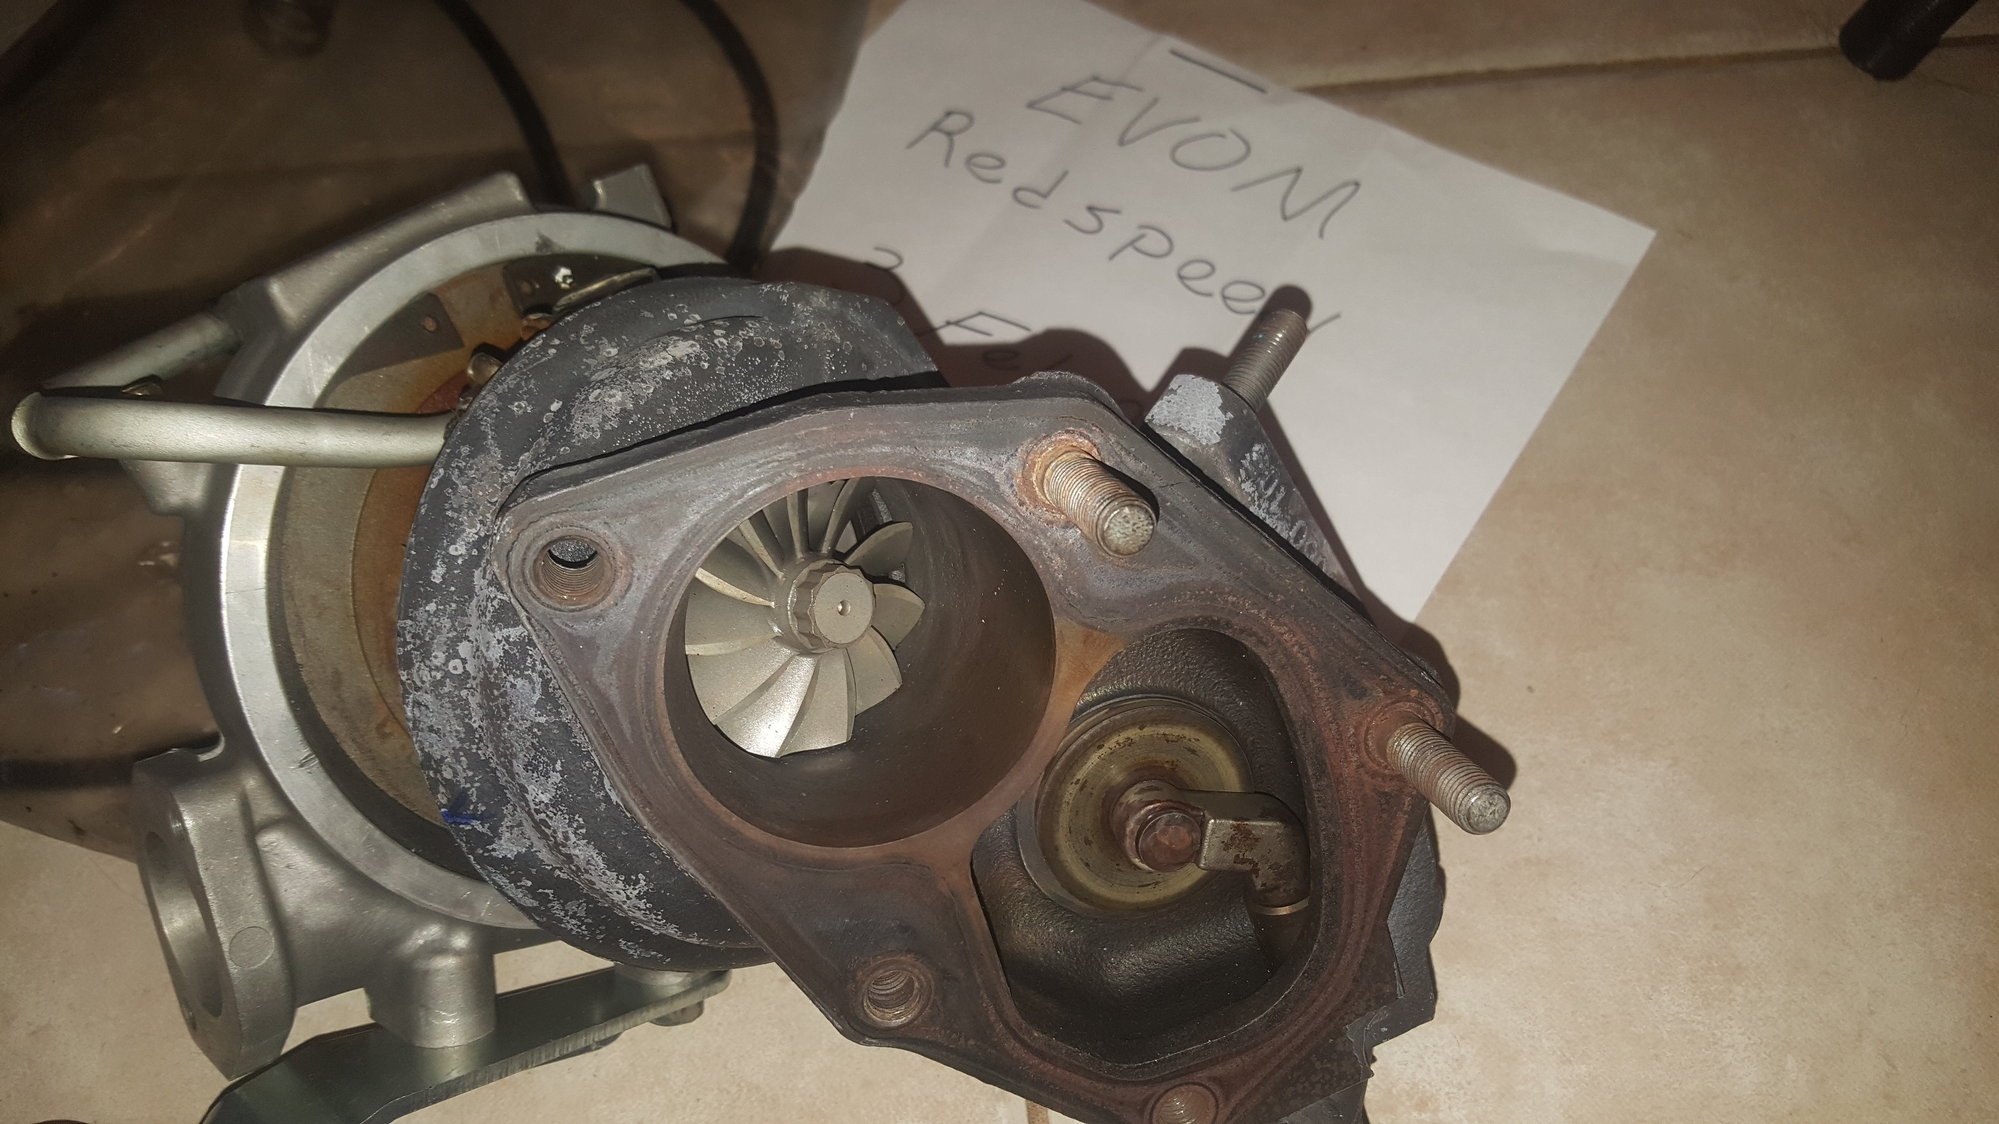 Engine - Power Adders - Evo 8 Leftover Parts, HKS Cam Gear, RC Injectors, ACT Clutch, etc - Used - 2003 to 2006 Mitsubishi Lancer Evolution - Miami, FL 33172, United States